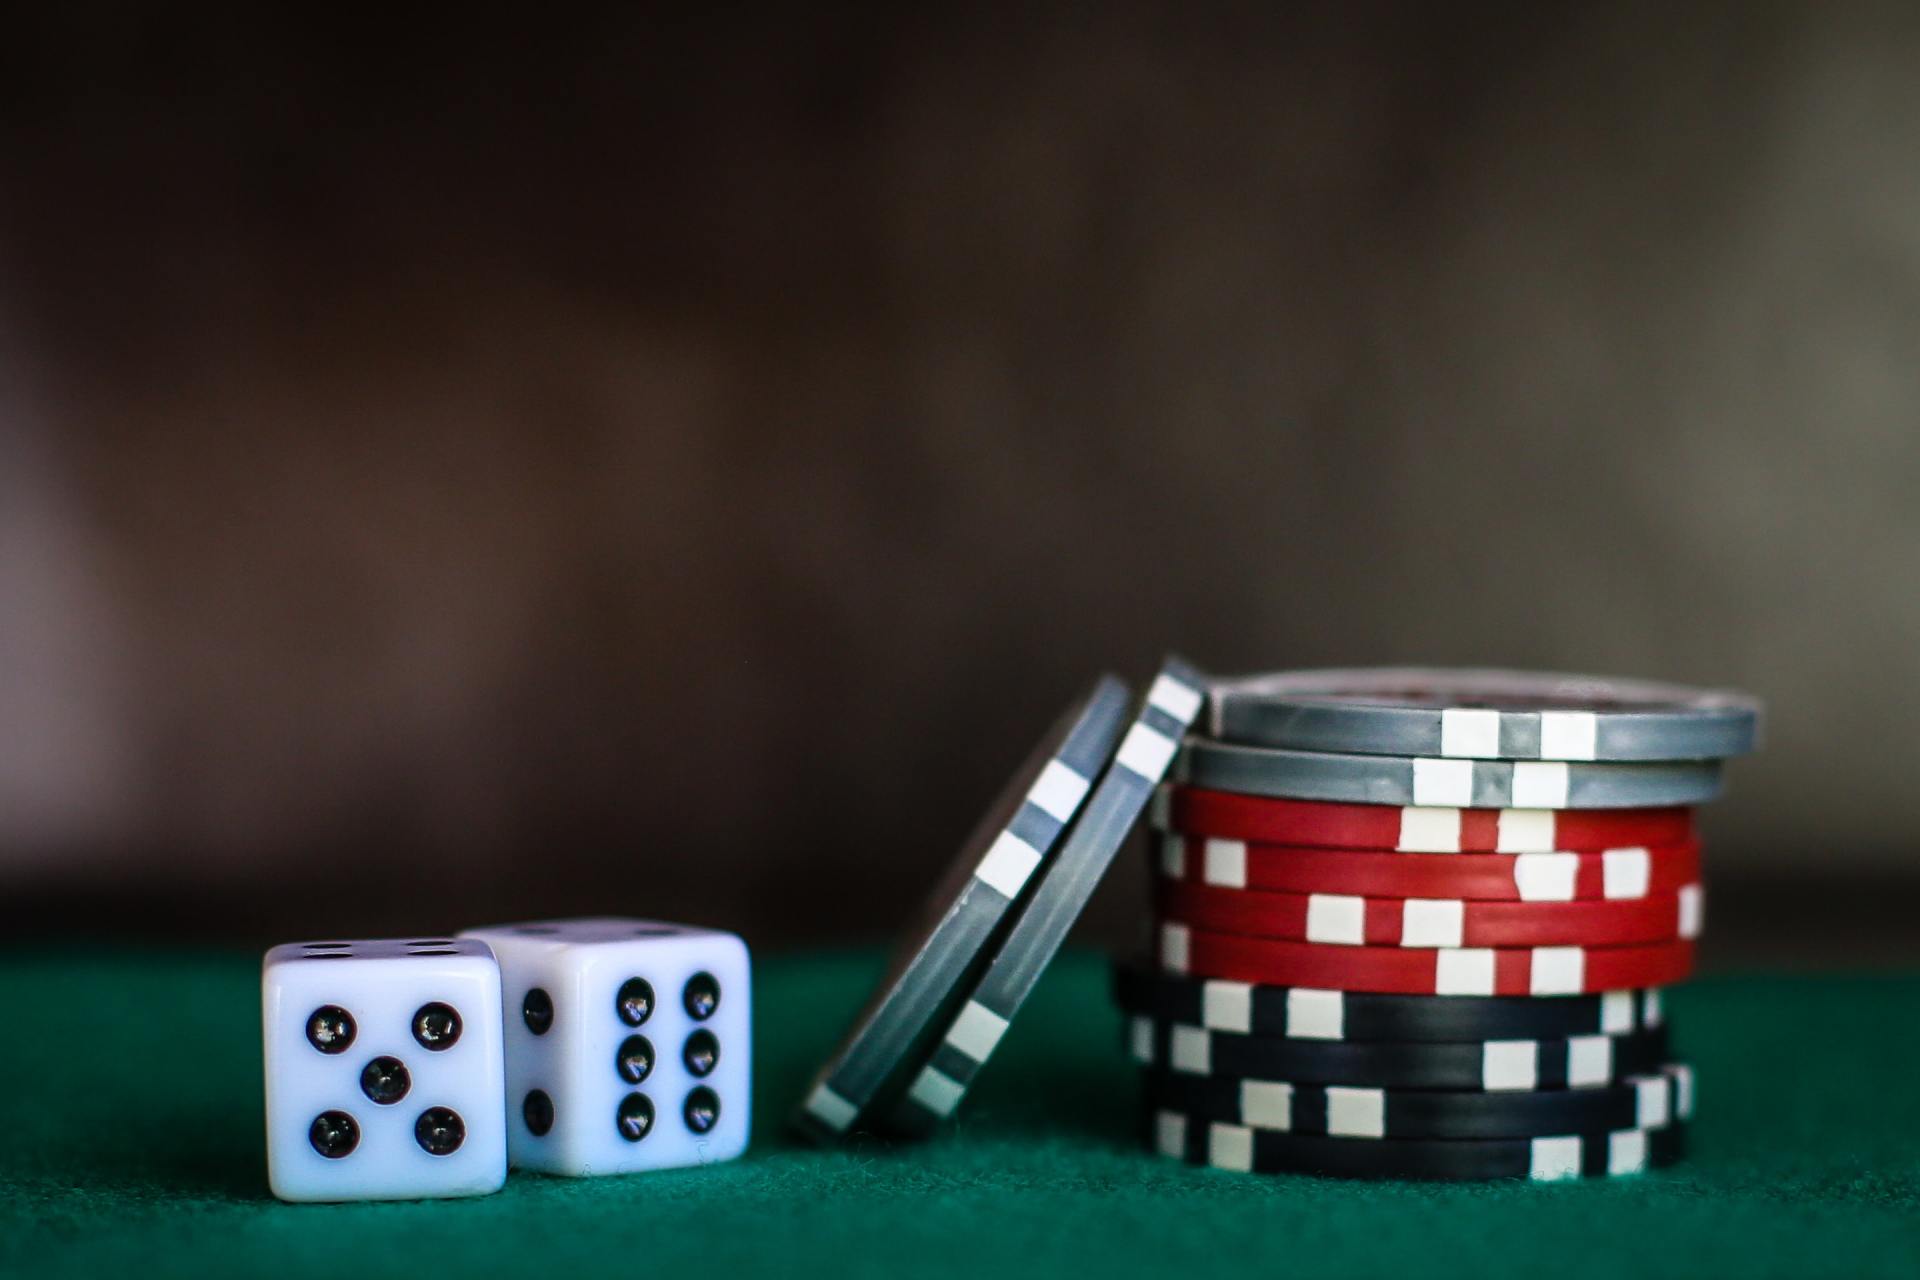 Heavy gamblers suffer a one-third higher mortality according to Oxford University.